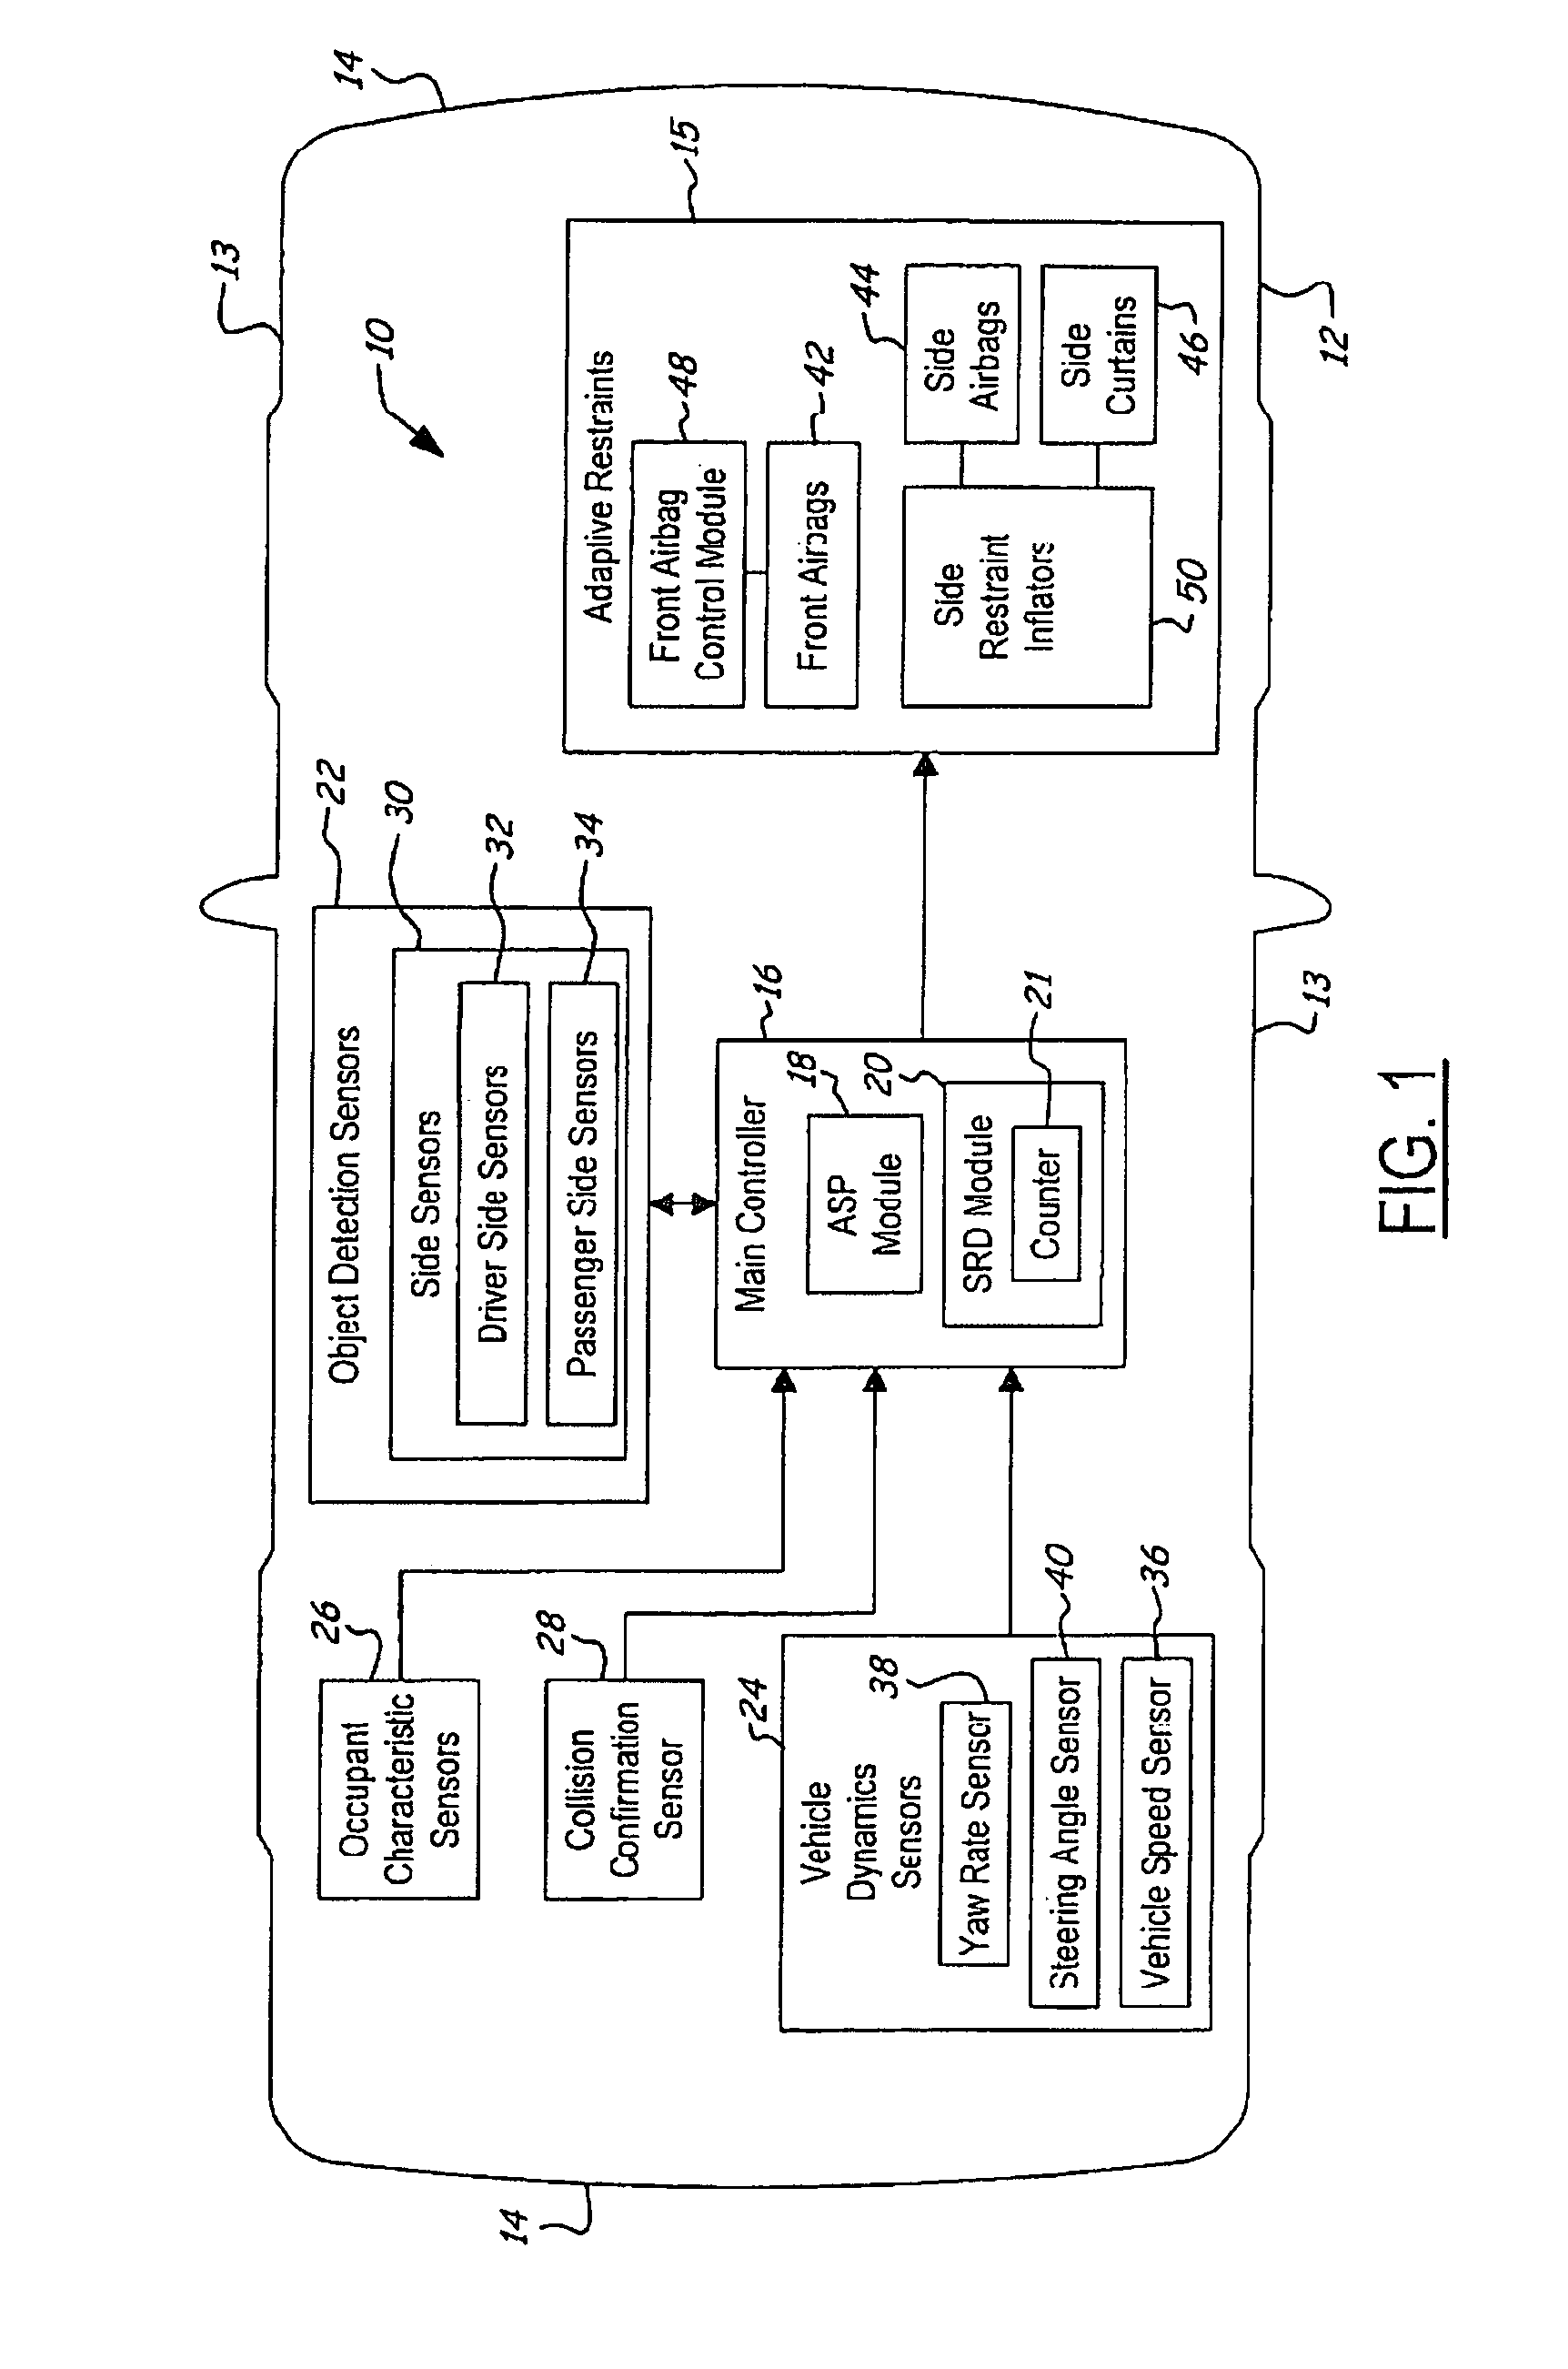 Method and control system for predictive deployment of side-impact restraints